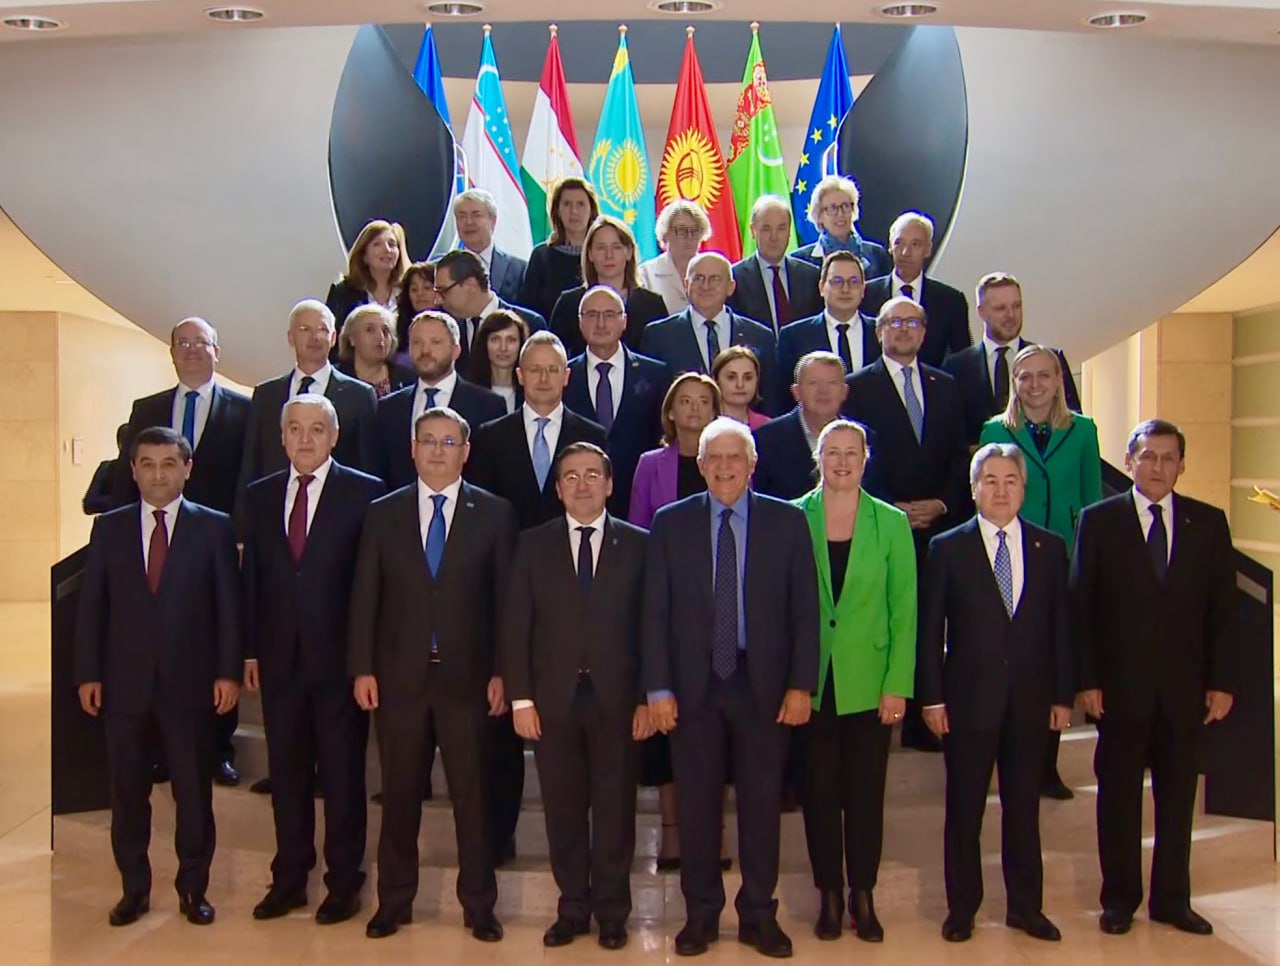 Minister Bakhtiyor Saidov traveled to Luxembourg to participate in the 19th meeting of ministers "European Union - Central Asia."